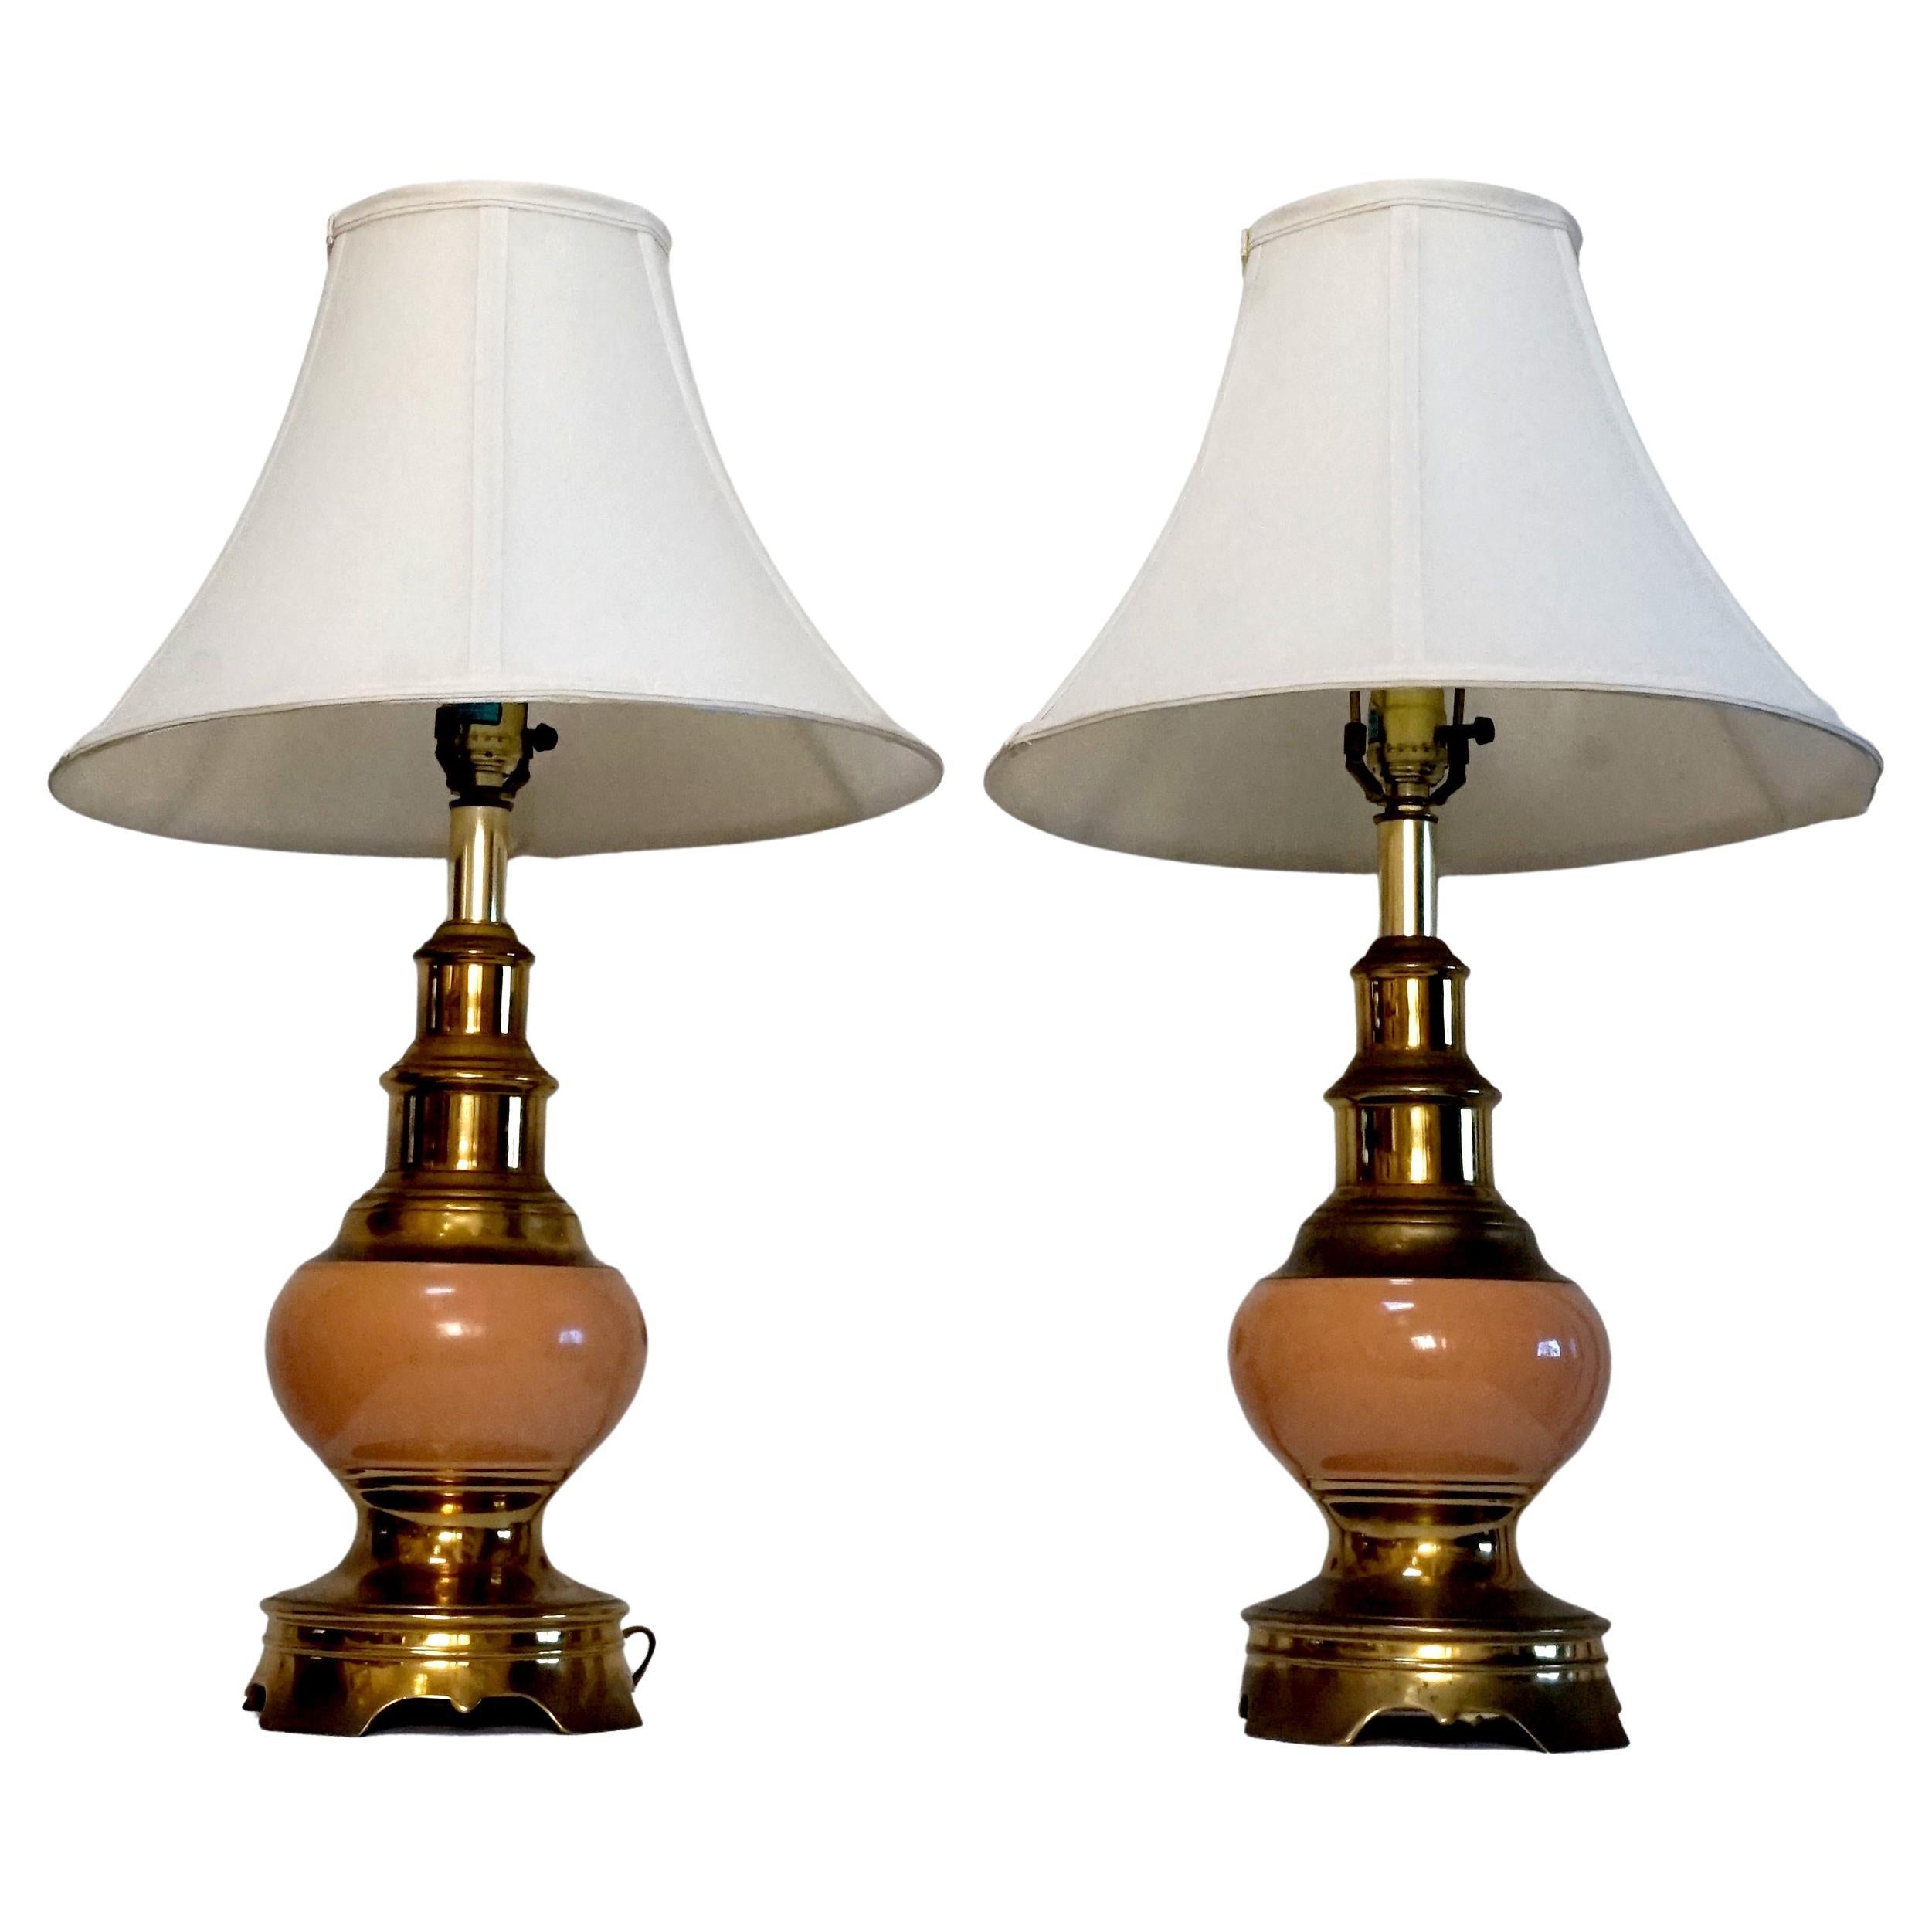 A pair of vintage Stiffel brass and ceramic table lamps steal the scene in a high glaze coral accented with brass. The pair is in wonderful vintage condition and presents well.
 The brass finish has developed a deeper patina over time -- no brassy